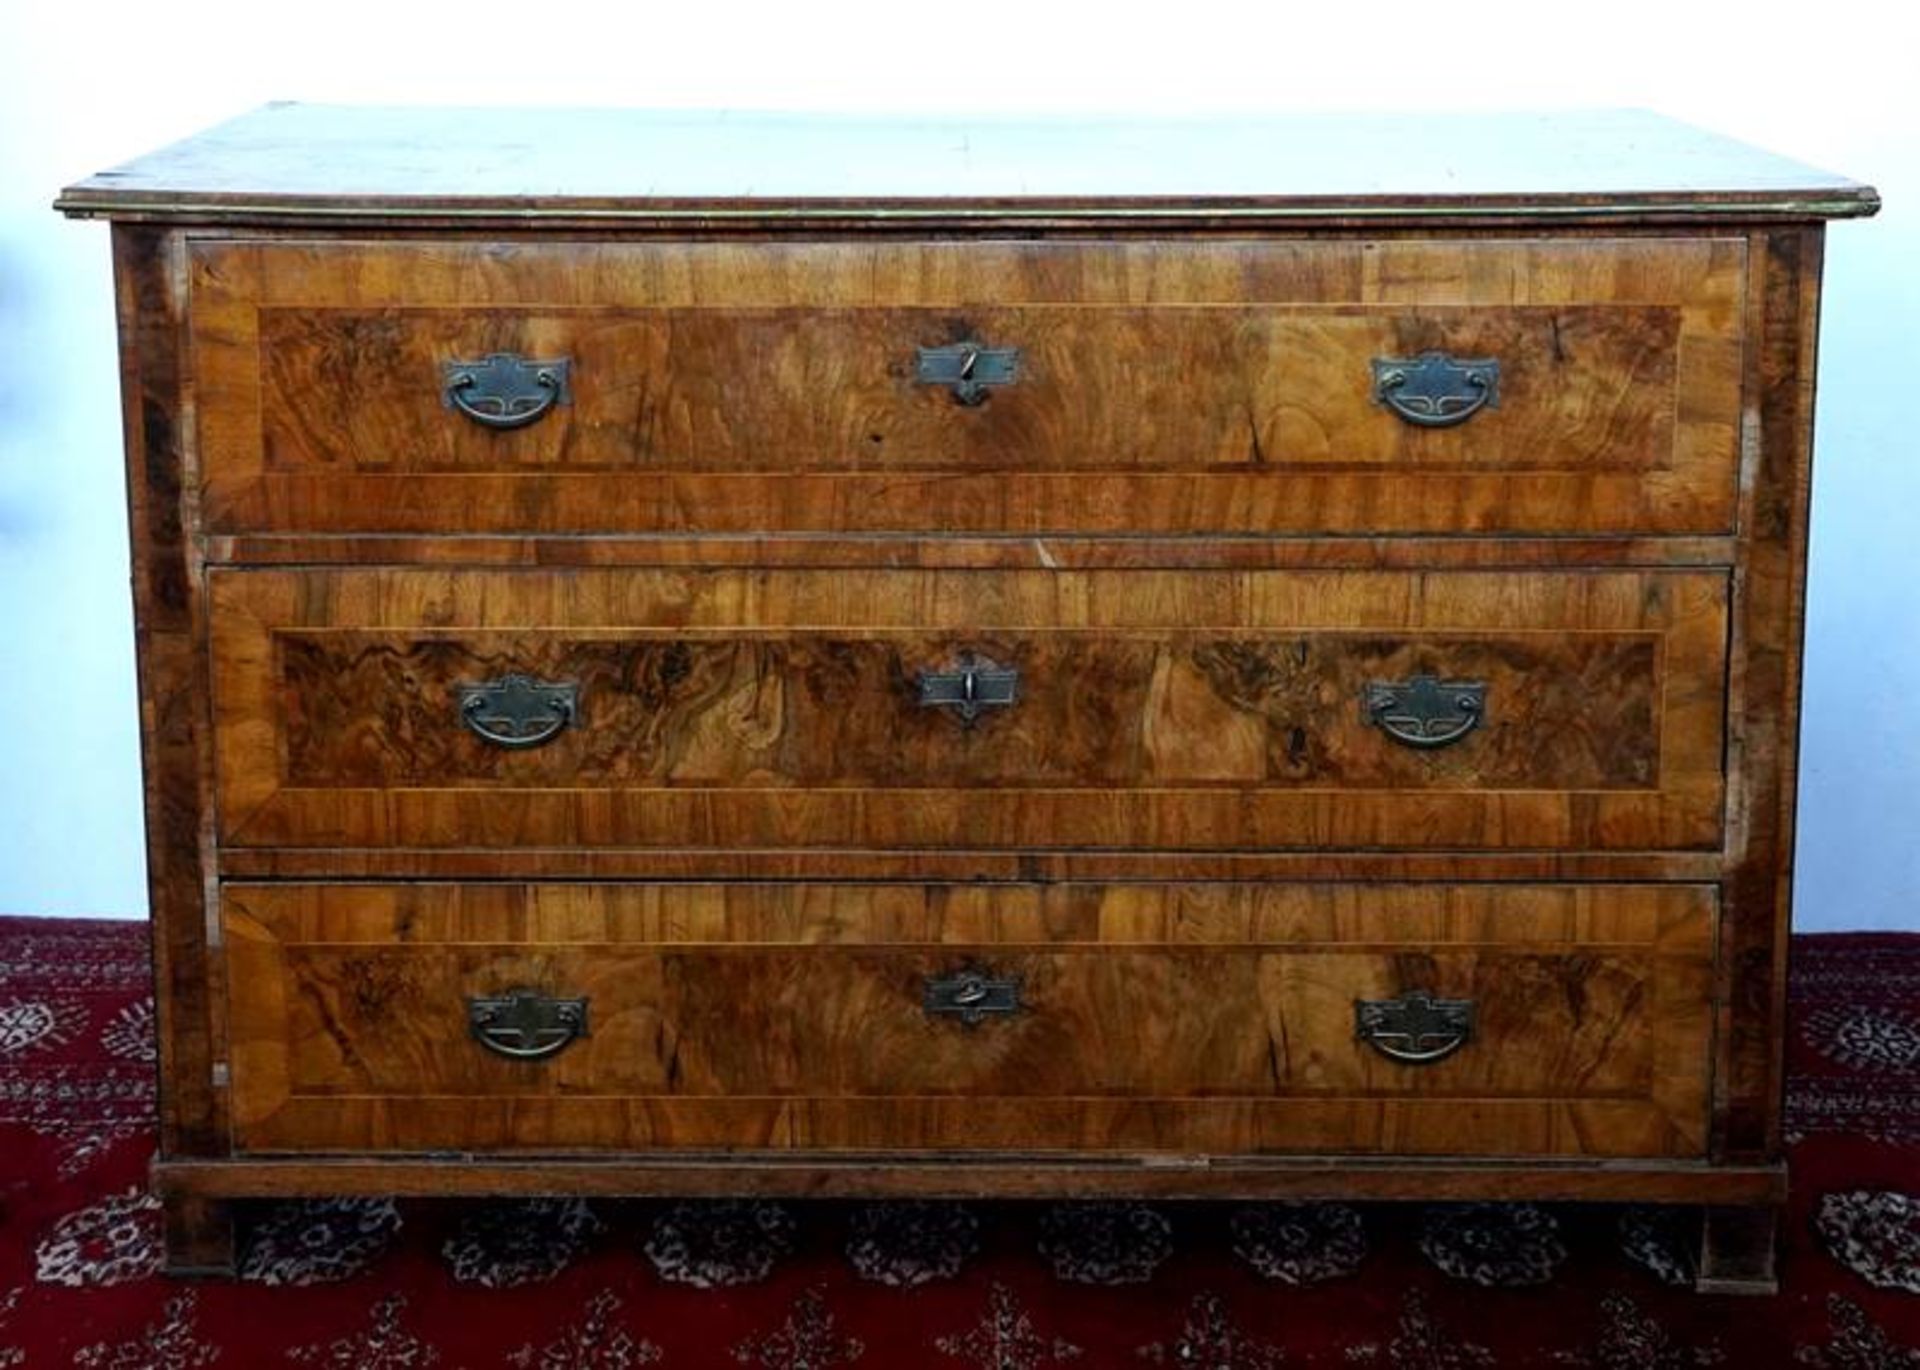 Louis-Seize chest of drawers